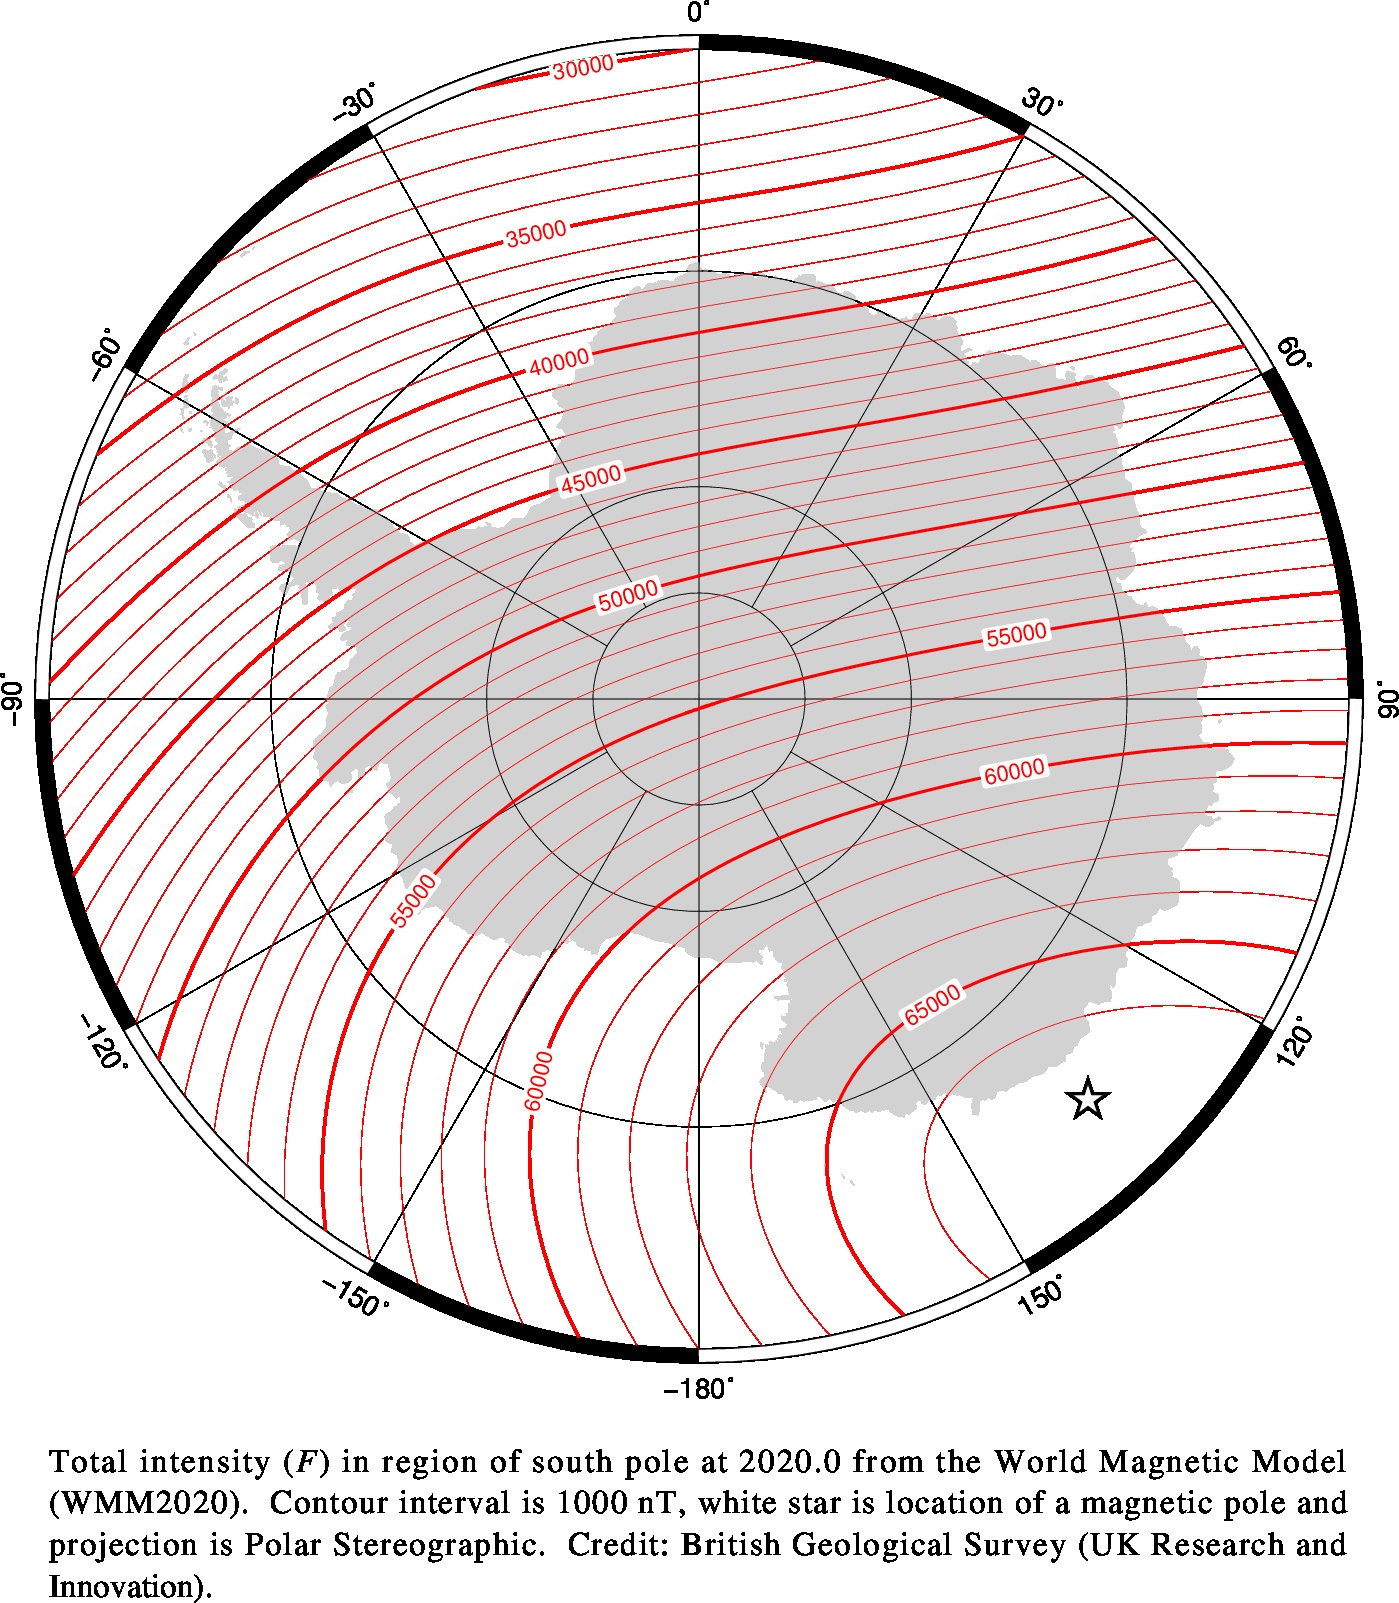 Magnetic chart showing Total Intensity